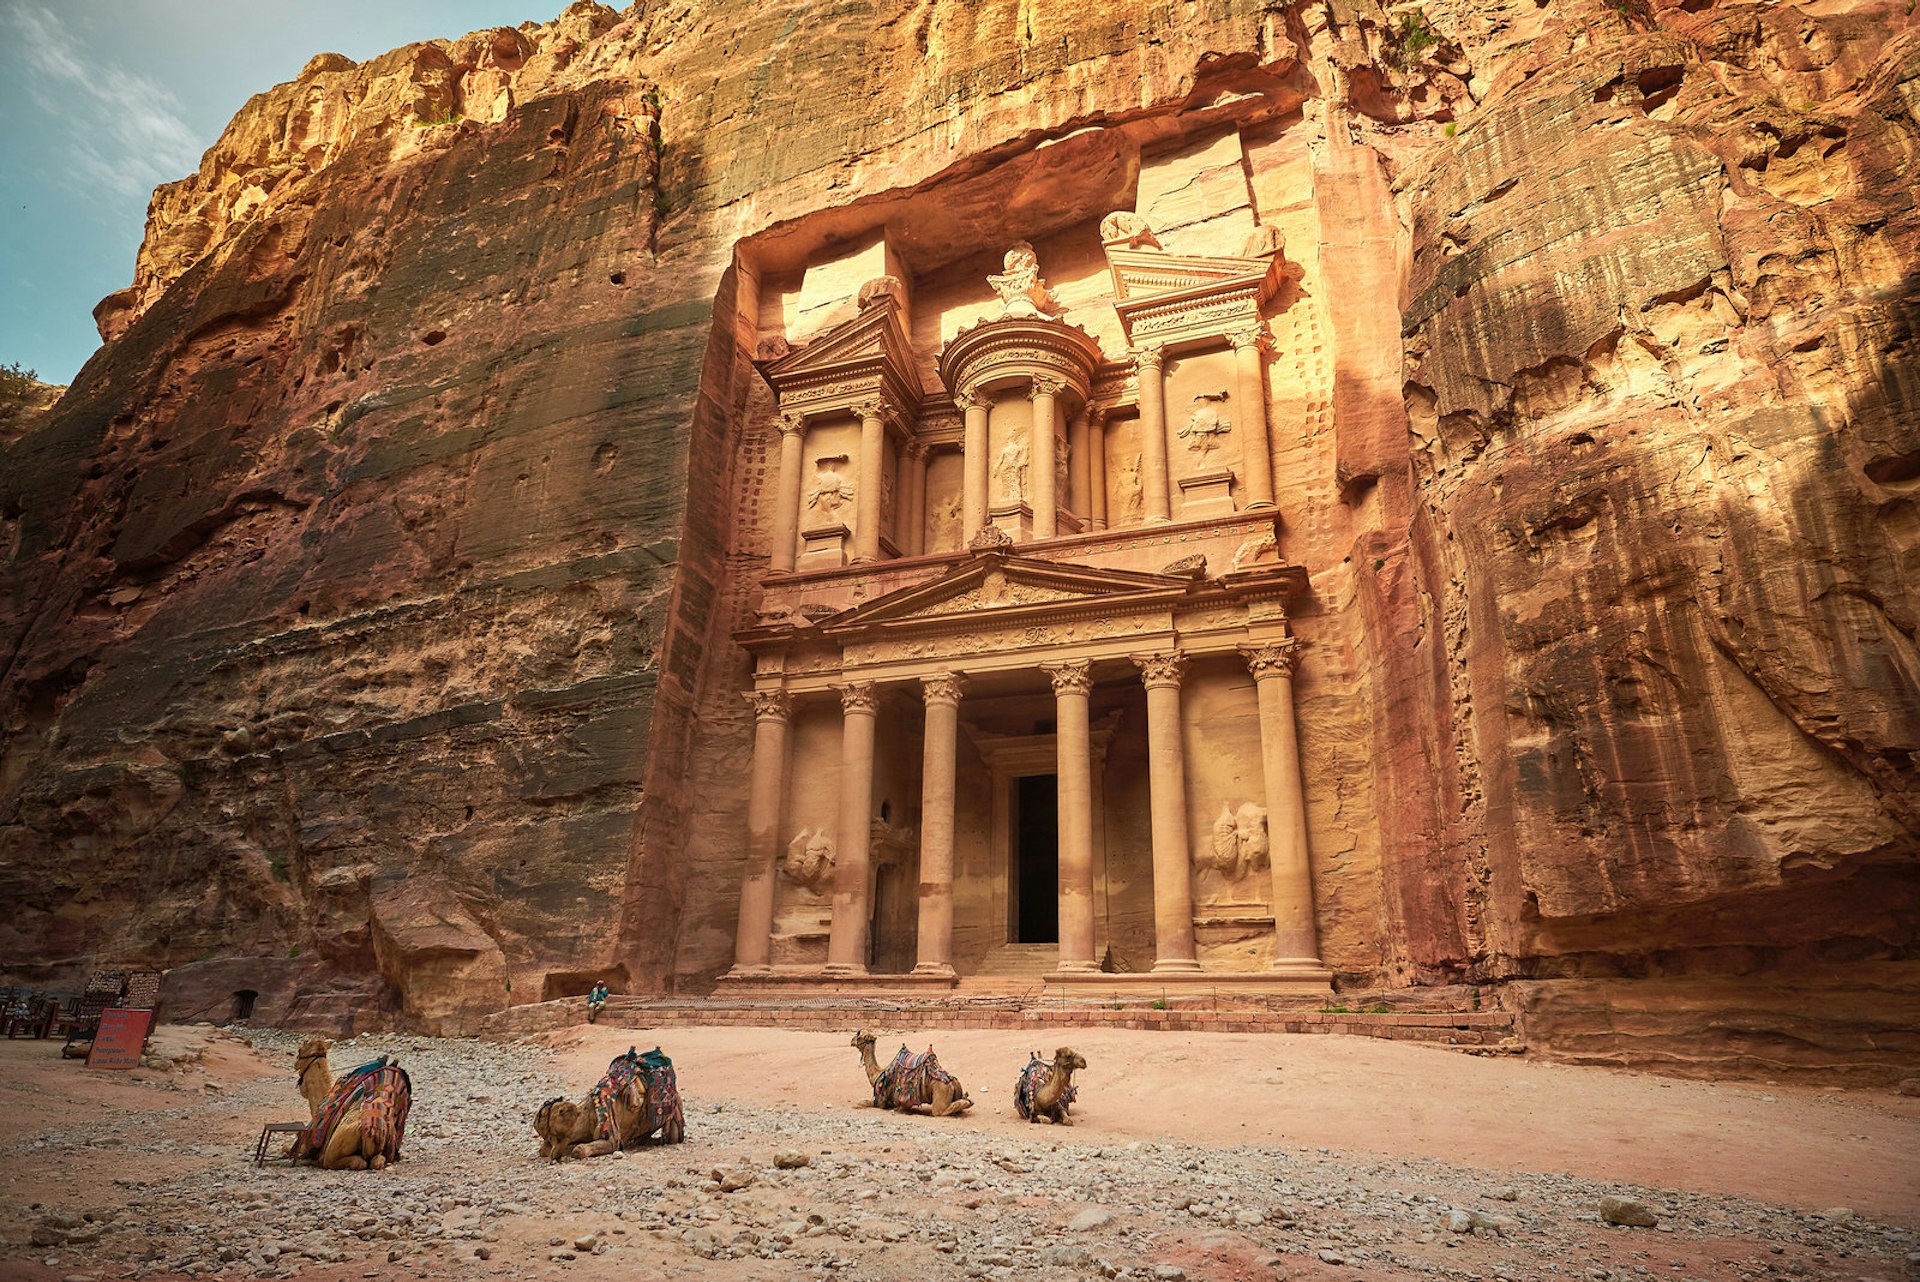 Camels in front of the Treasury, ancient city of Petra, Jordan. Image by Aleksandra H. Kossowska / Shutterstock